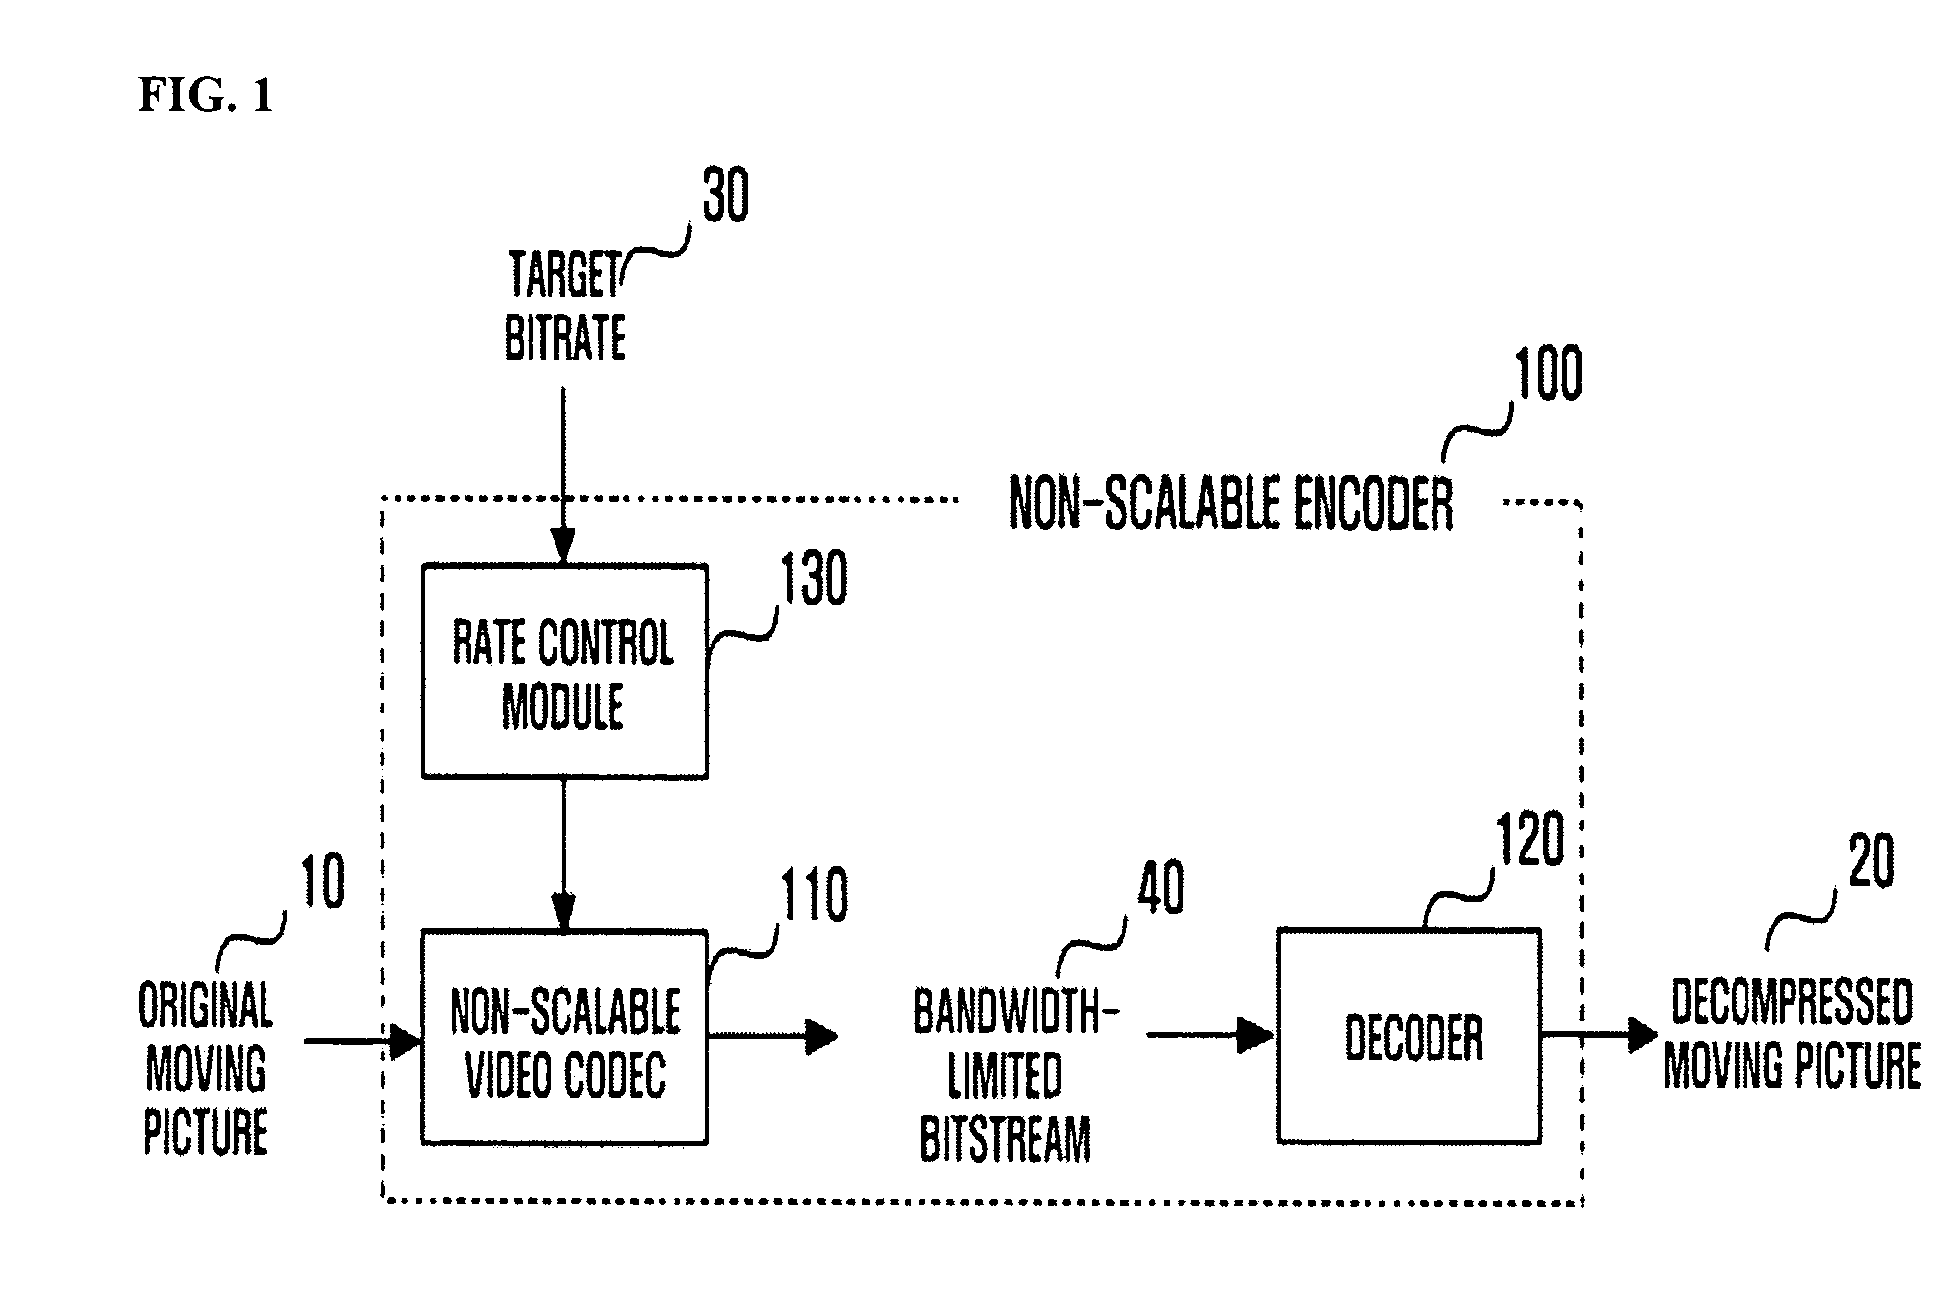 Scalable video coding method and apparatus using pre-decoder